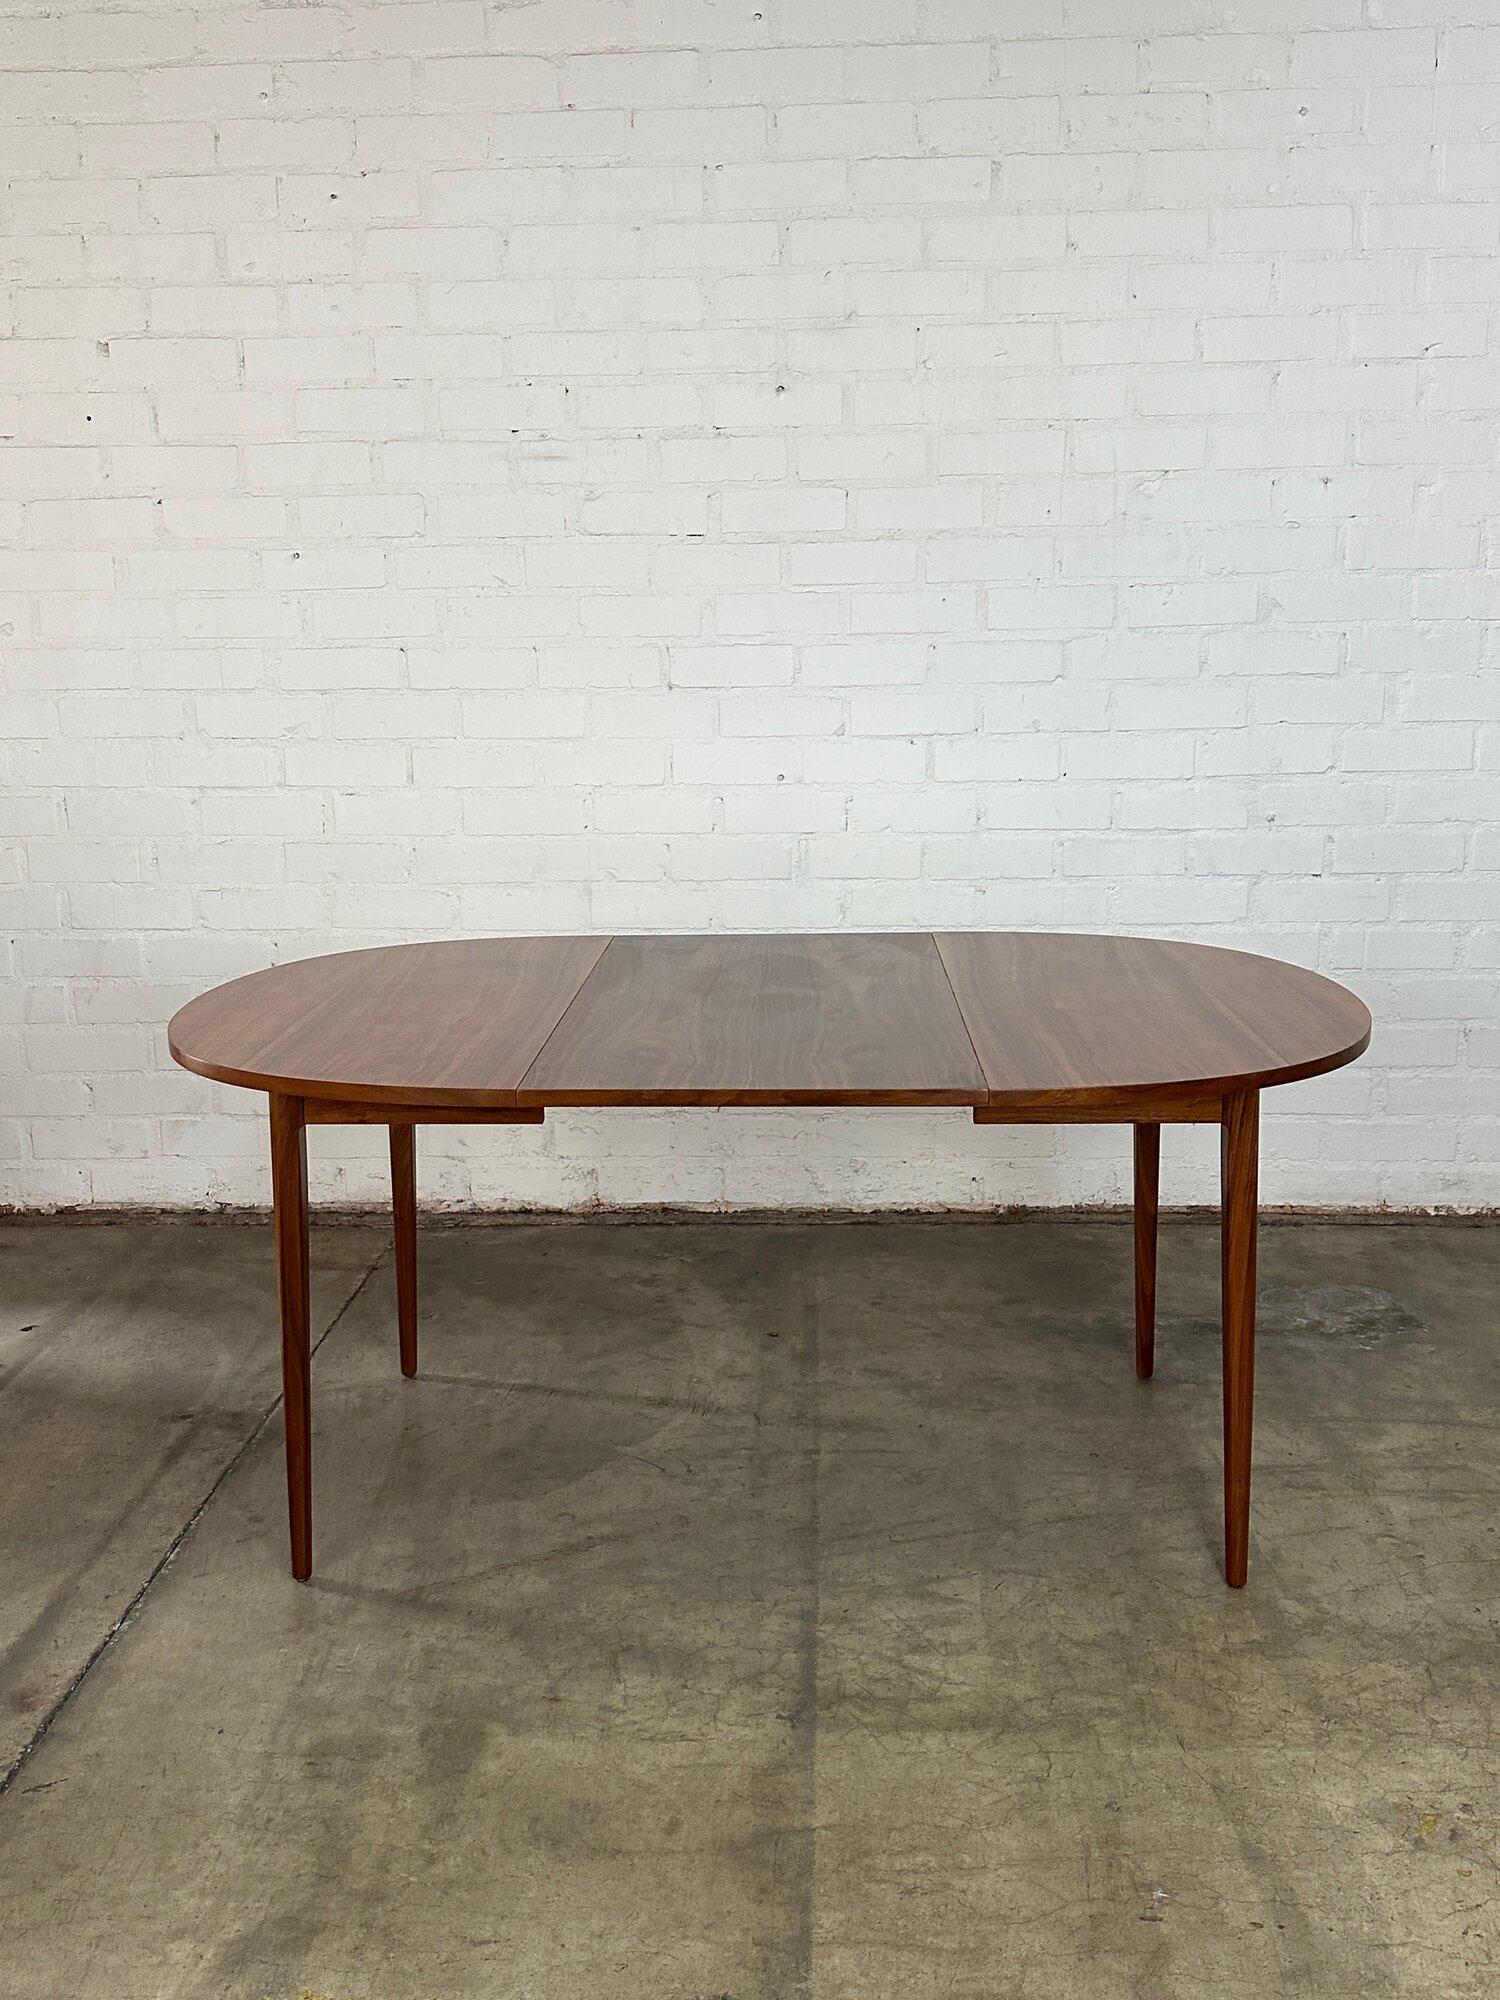 W88.25 W44.25 D44.25 H29.25 KC27.75 Leaf W22

Fully restored dining table with two extensions. Table has great bulbous round shape when closed. Table has two large extensions and is structurally sound and sturdy. 

